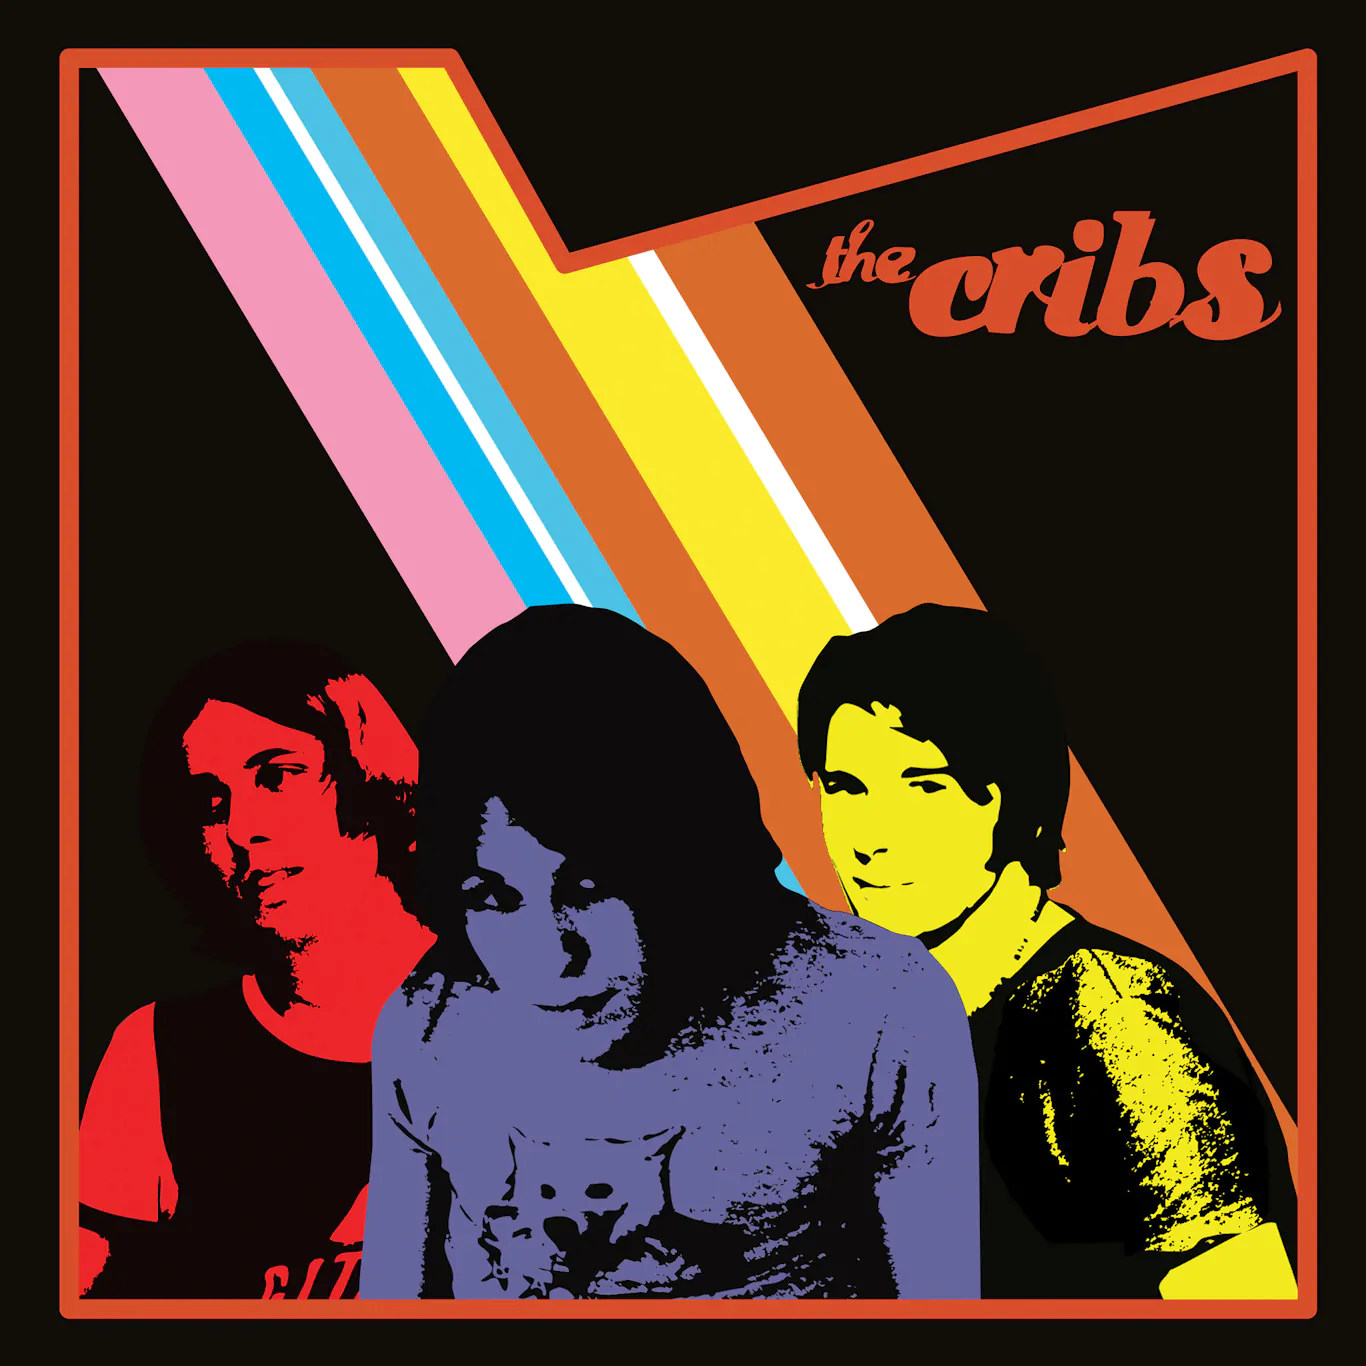 THE CRIBS announce details of deluxe reissues of their first three albums